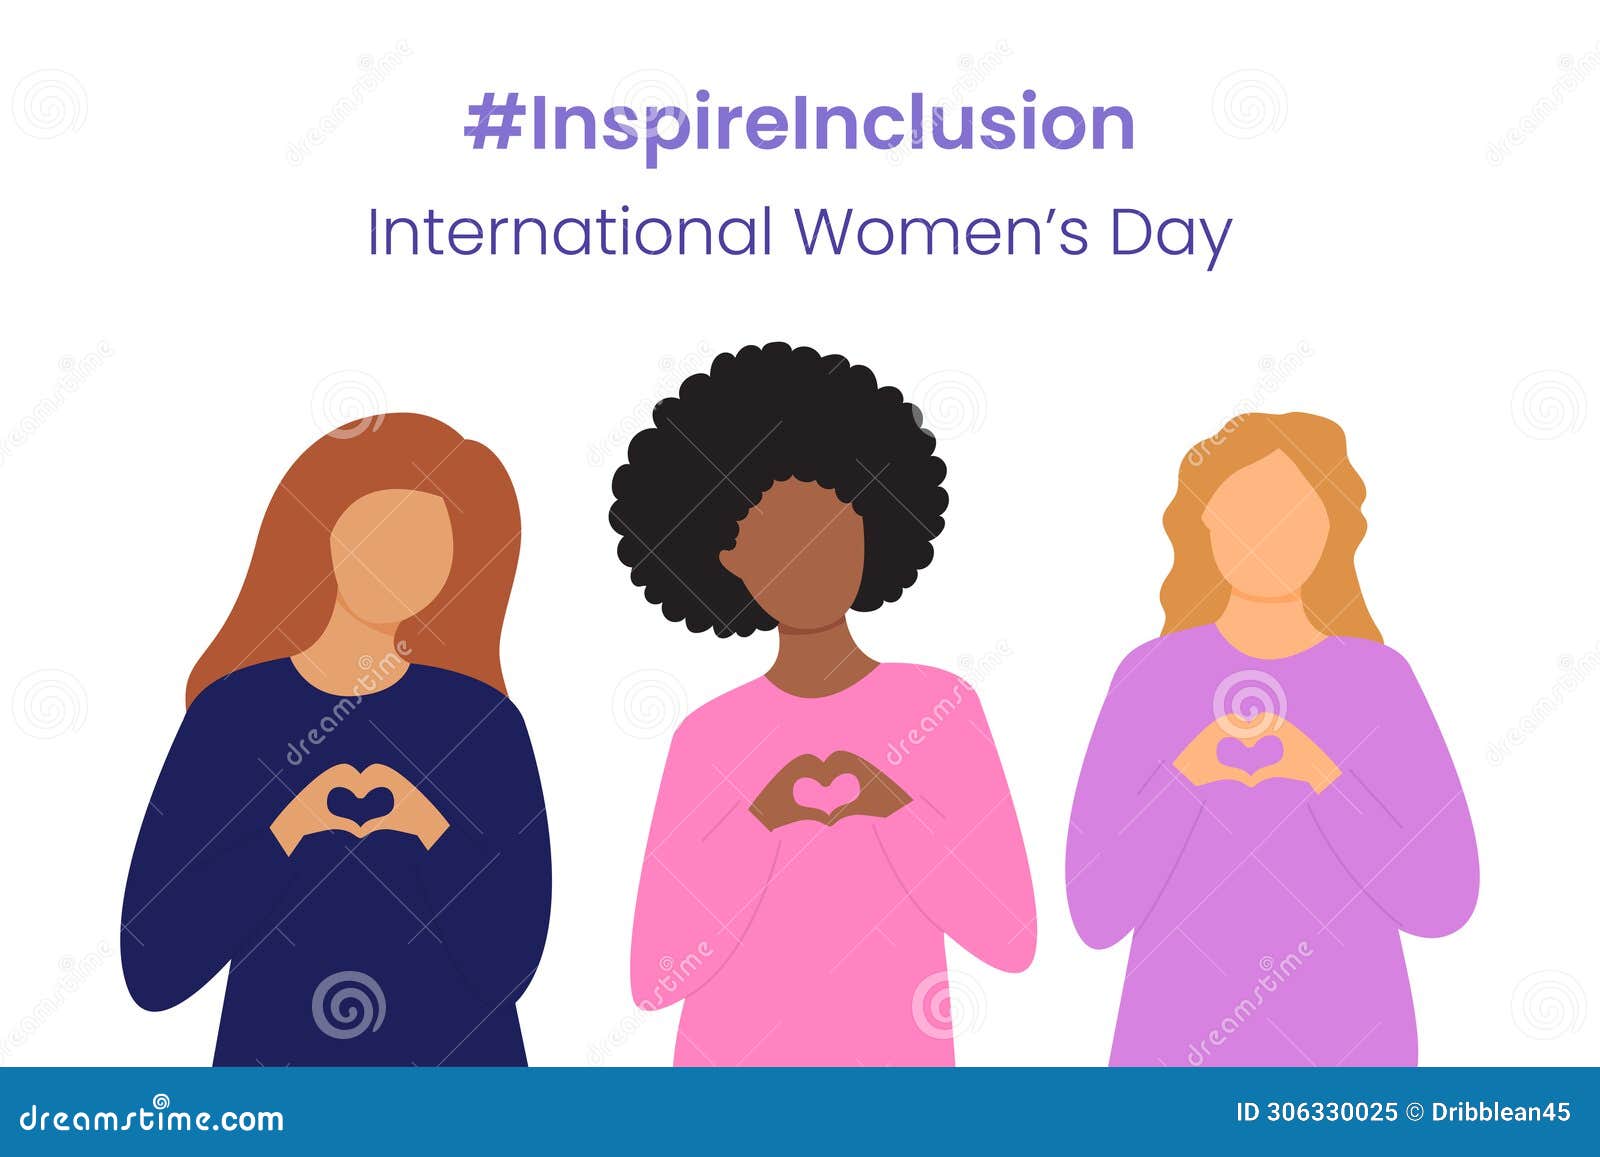 inspire inclusion slogan international women's day 8 march 2024. iwd world campaign.  women's characters